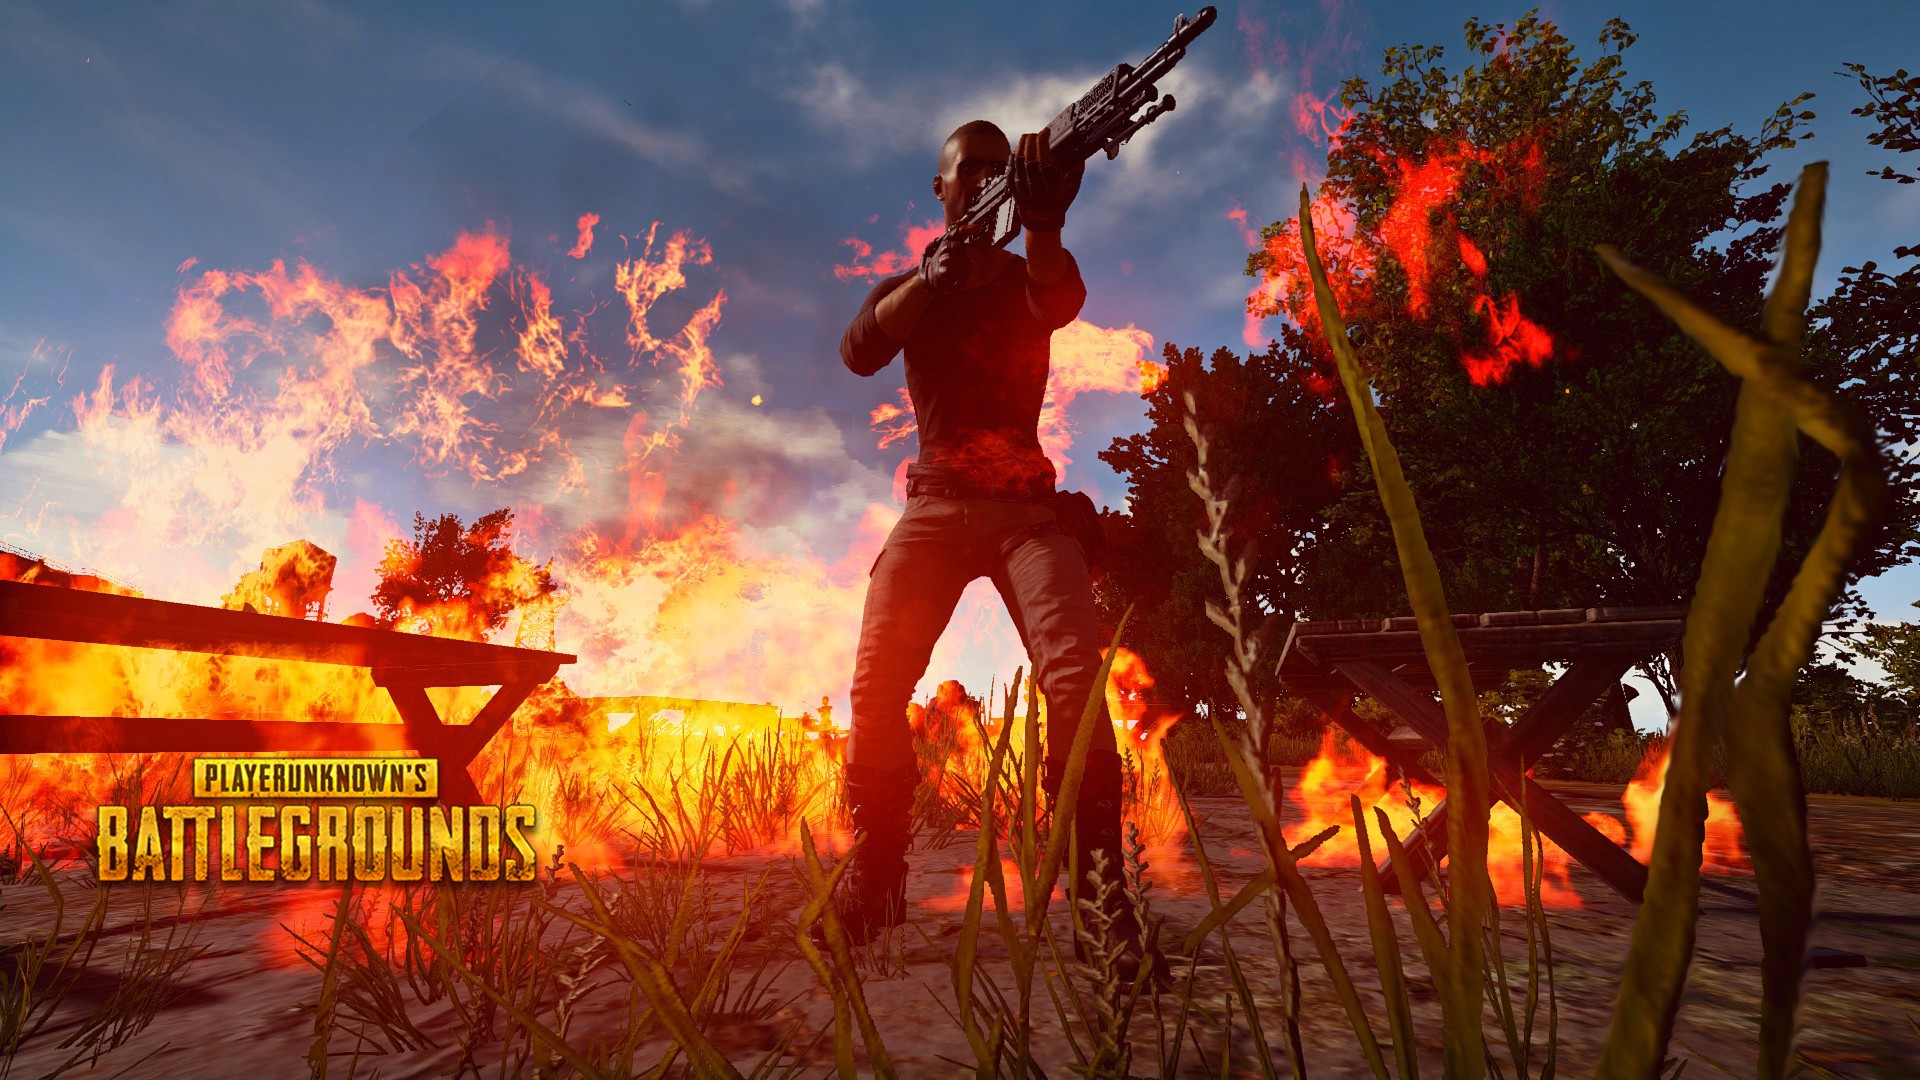 Wallpaper PUBG Xbox with resolution 1920X1080 pixel. You can use this wallpaper as background for your desktop Computer Screensavers, Android or iPhone smartphones